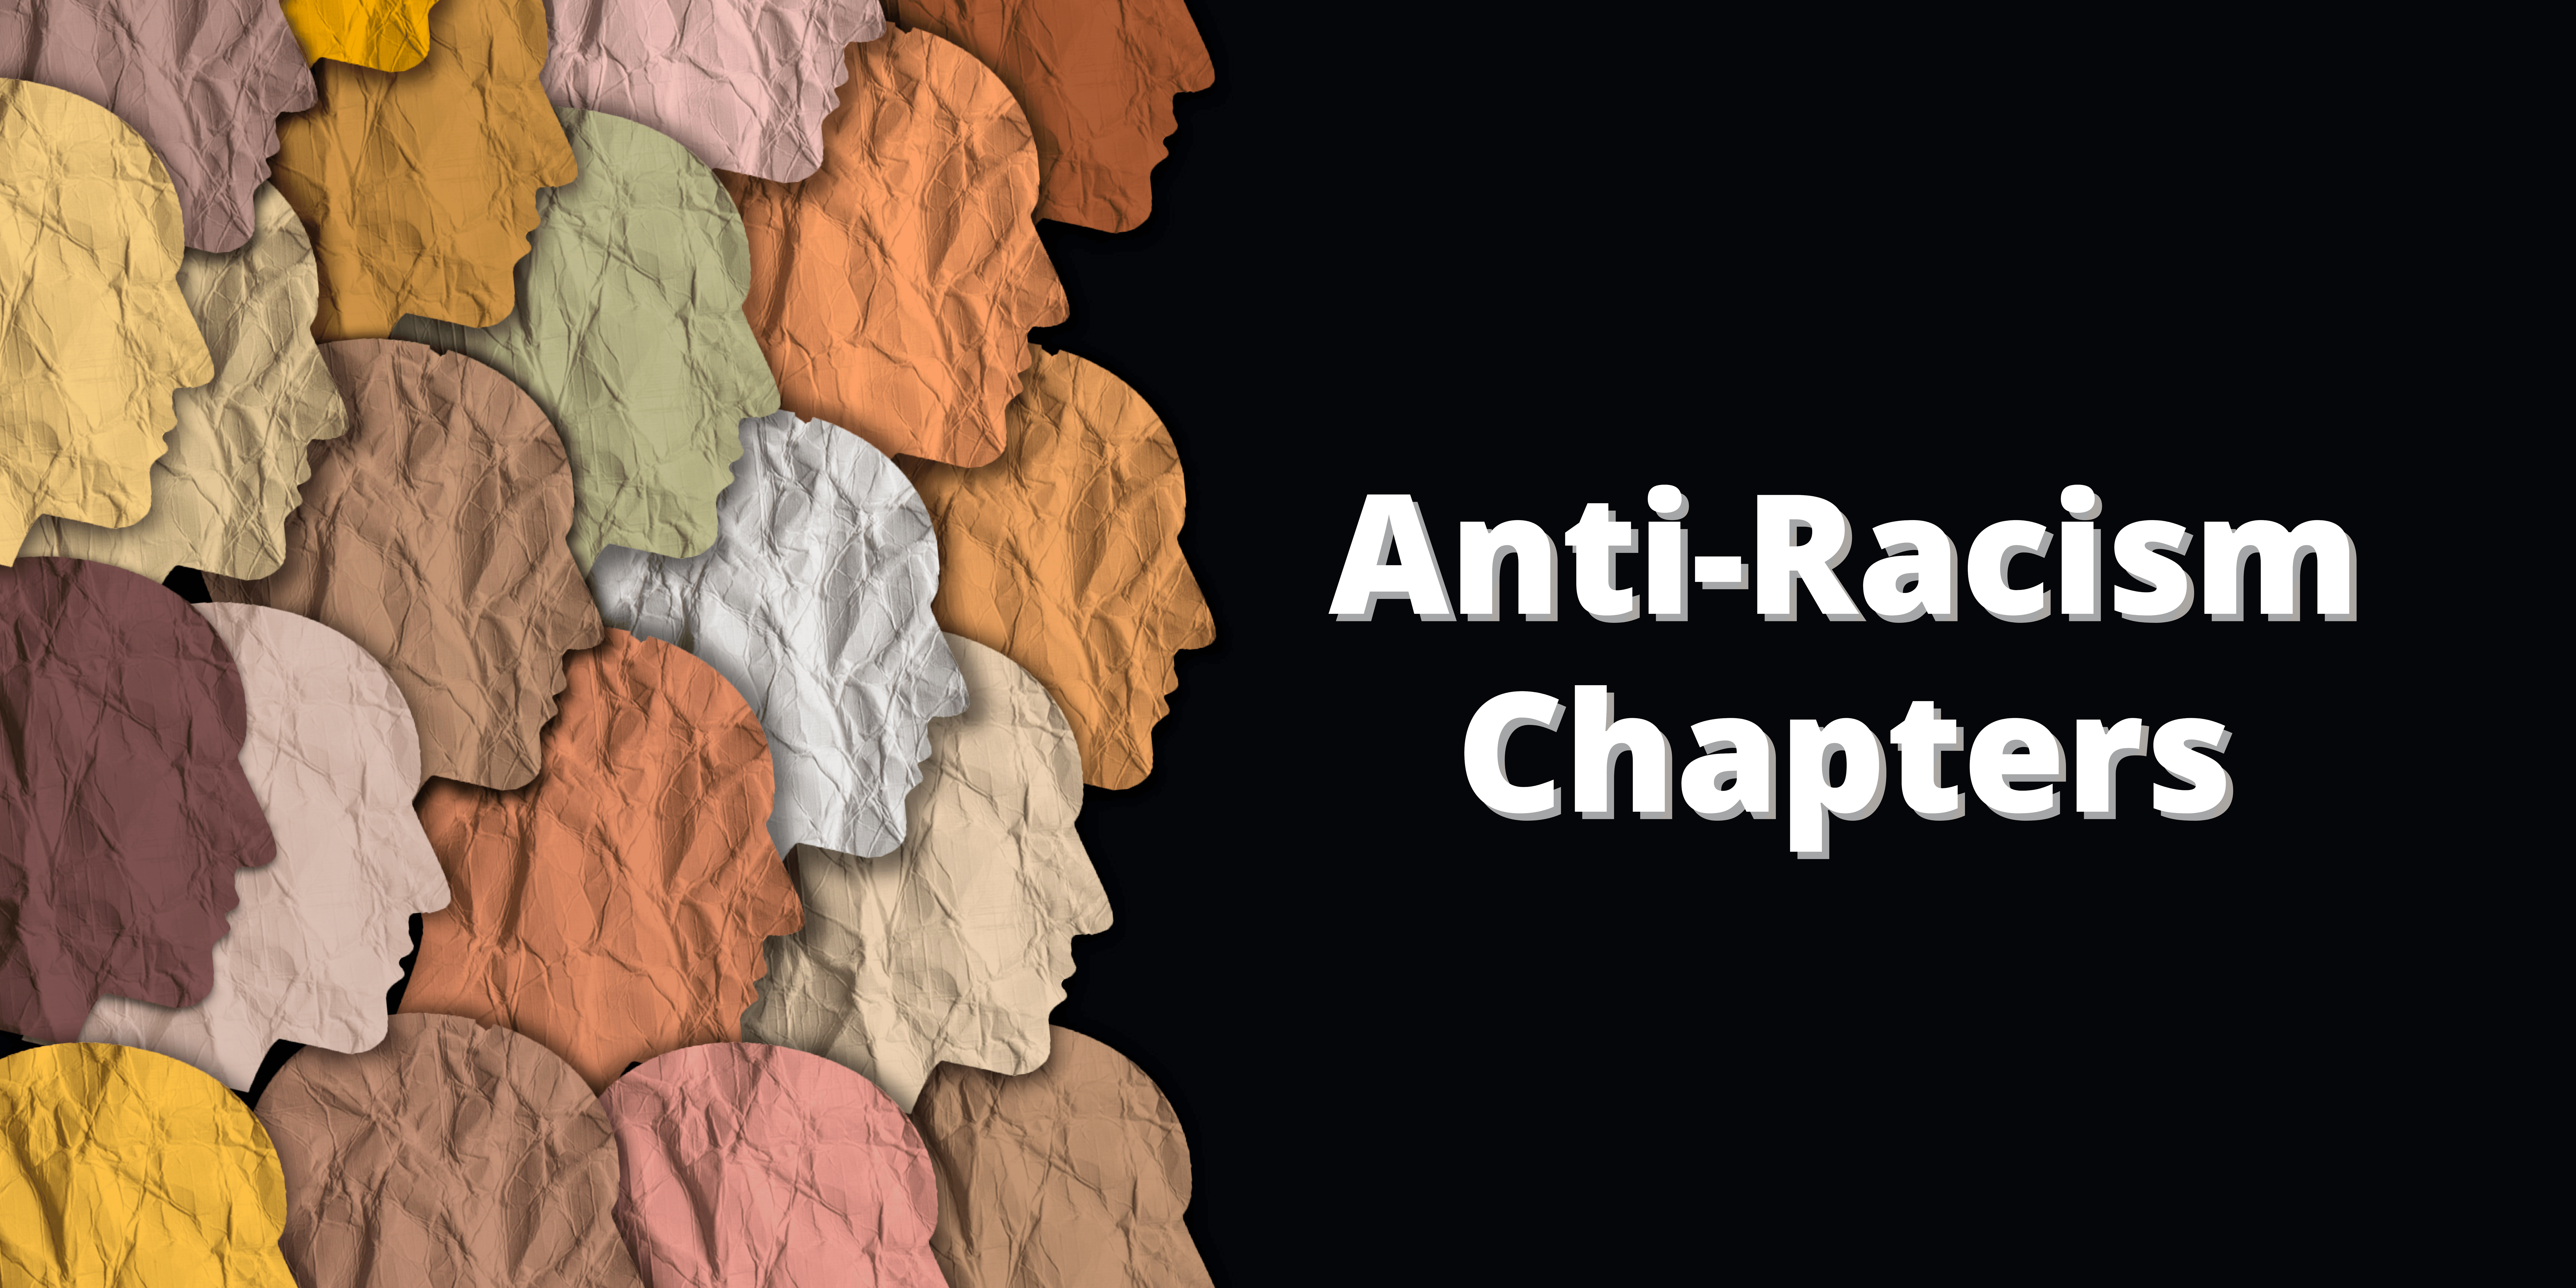 Anti-racism Chapters